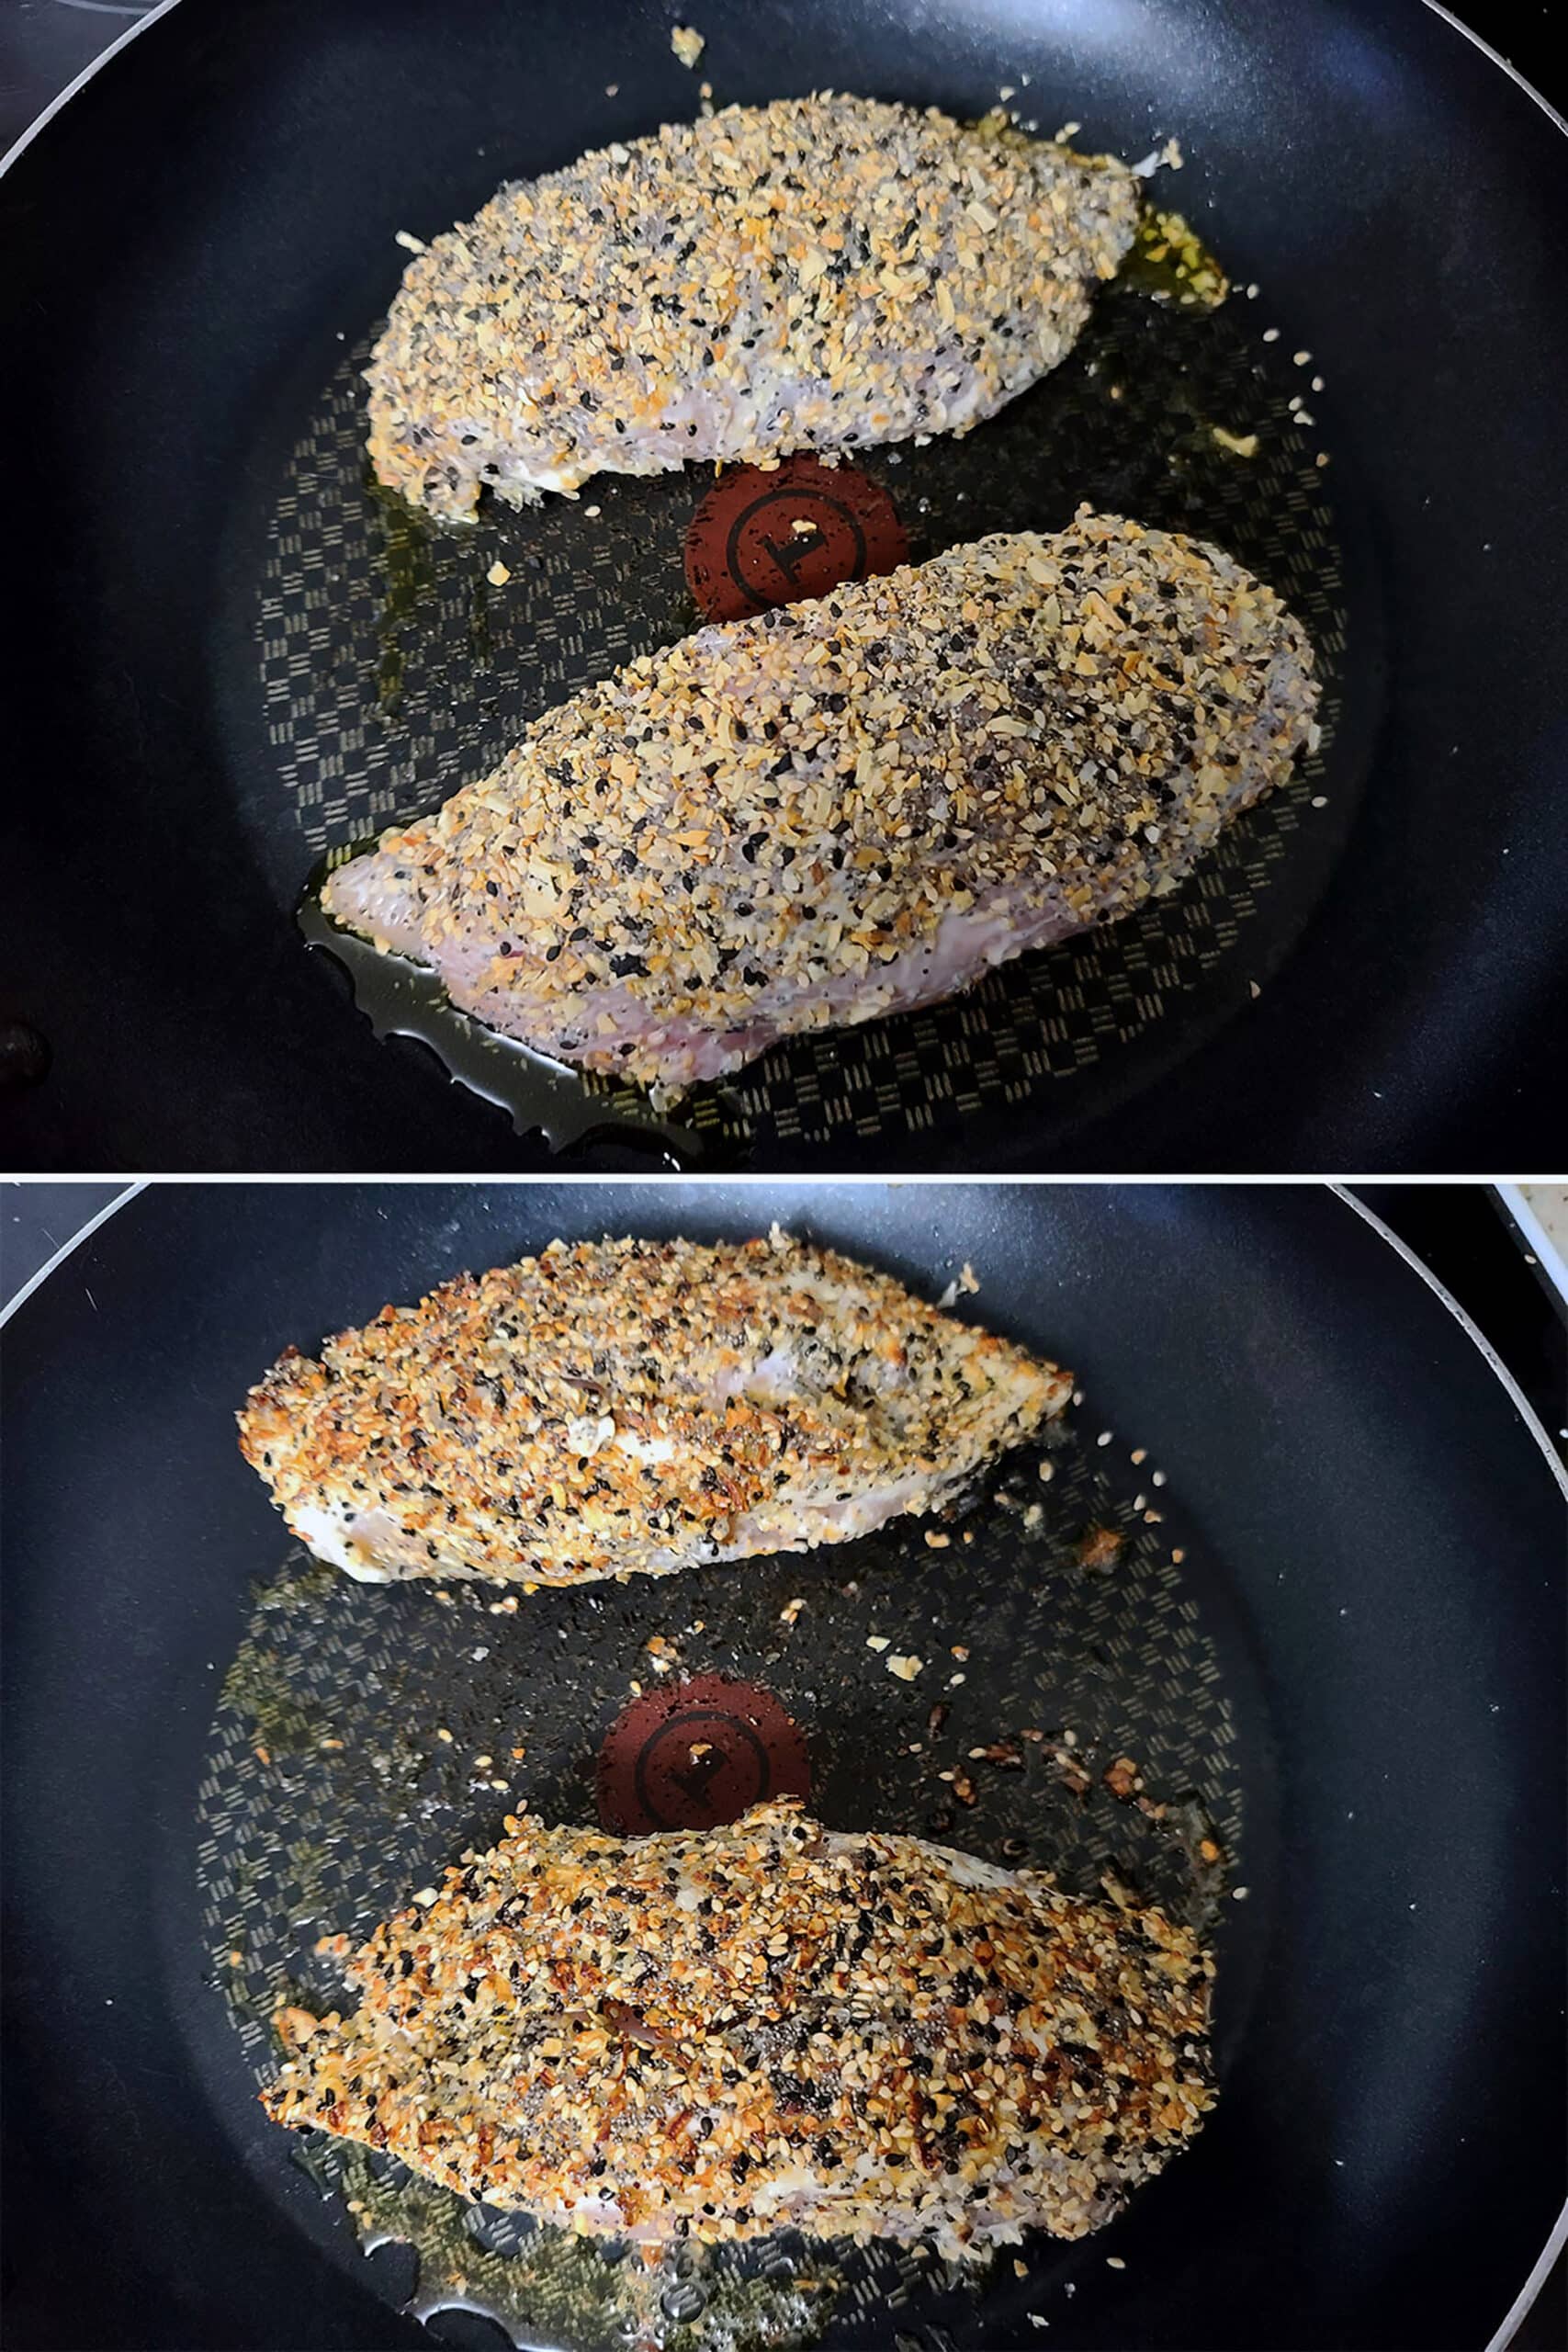 A 2 part image showing the everything seasoning coated chicken breasts being browned in a frying pan.